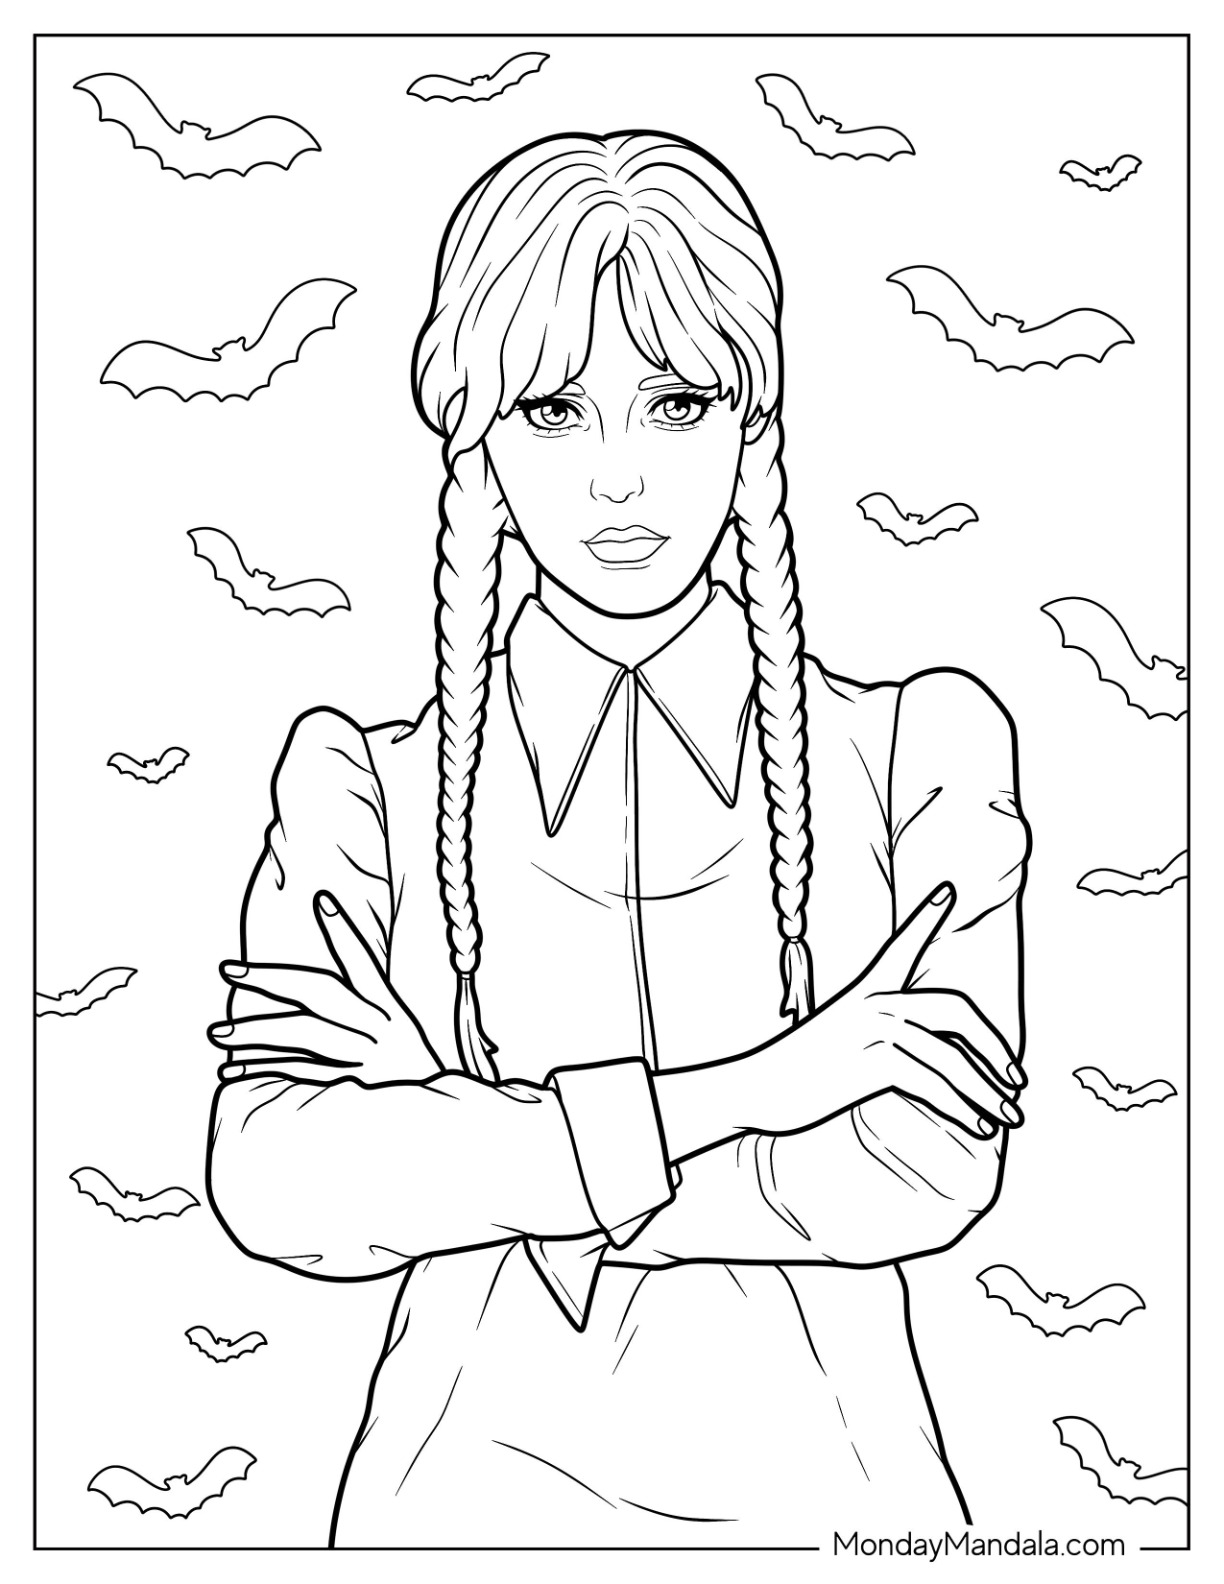 Wednesday coloring pages free pdf printables